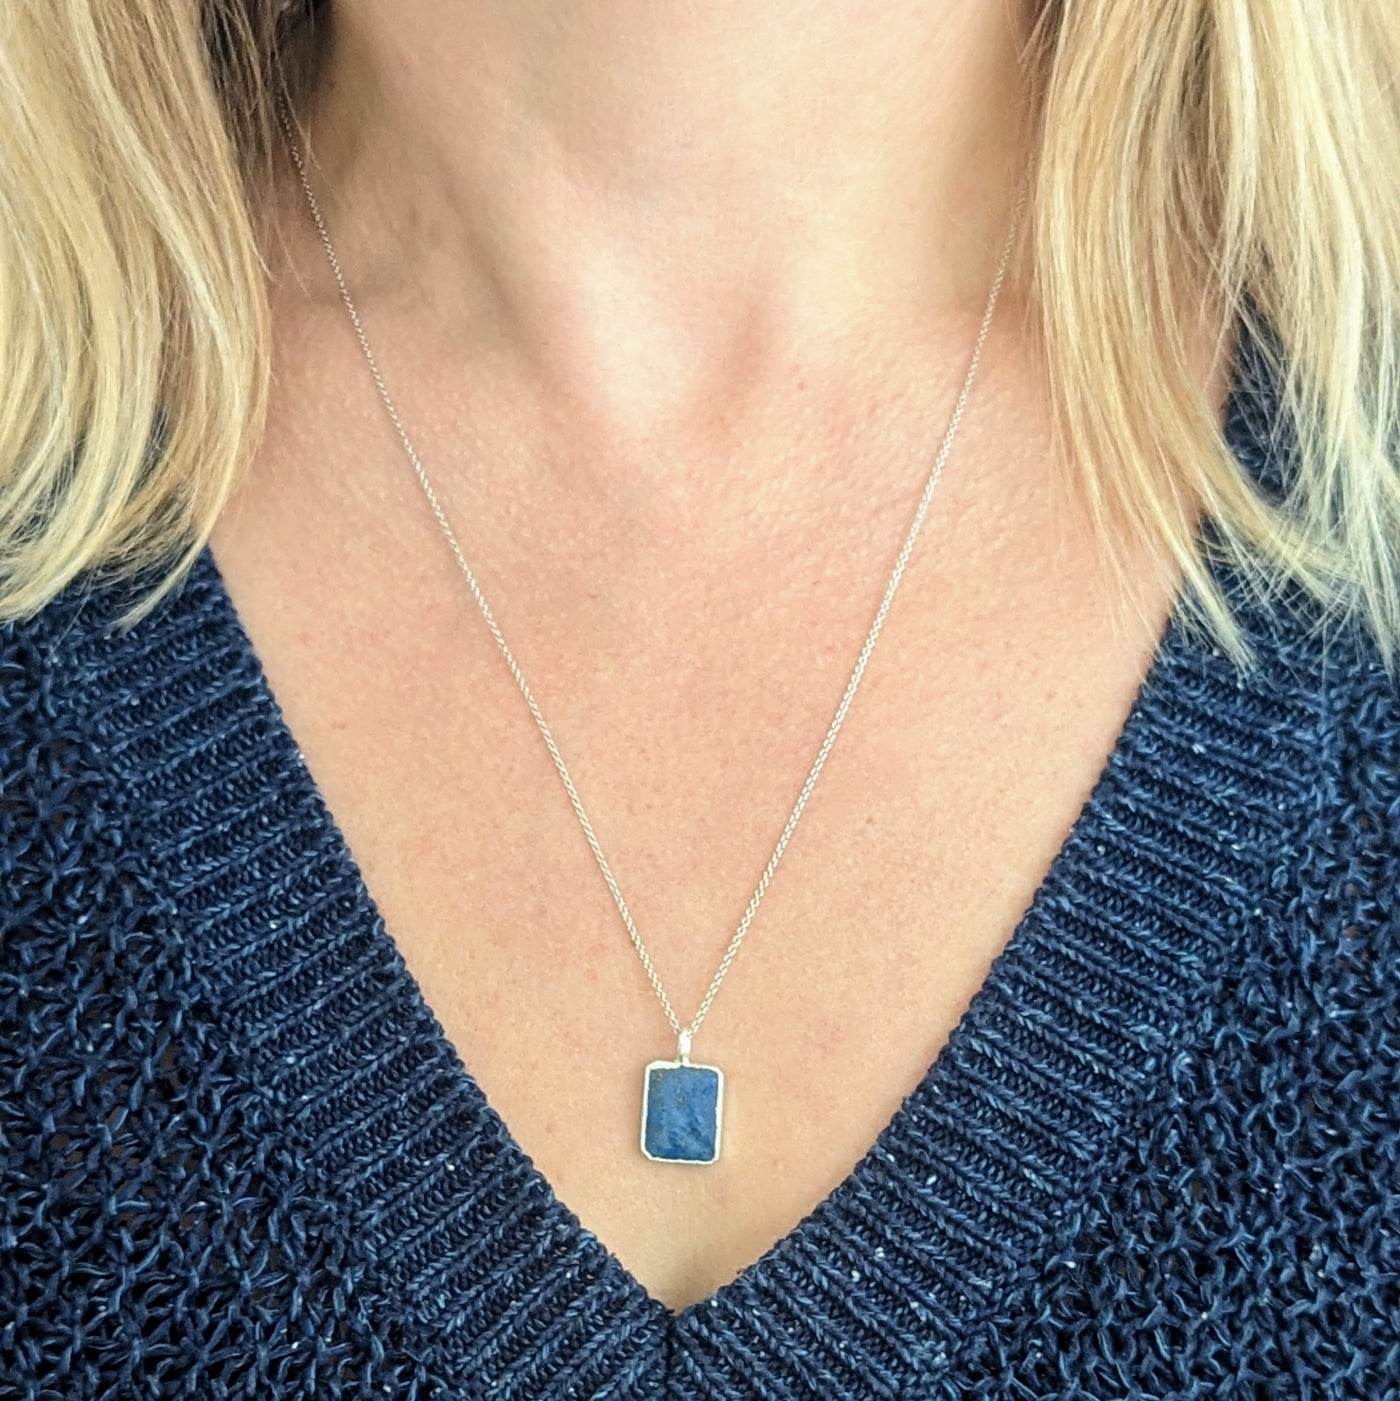 The Rectangle Lapis Lazuli Gemstone Necklace - Sterling Silver